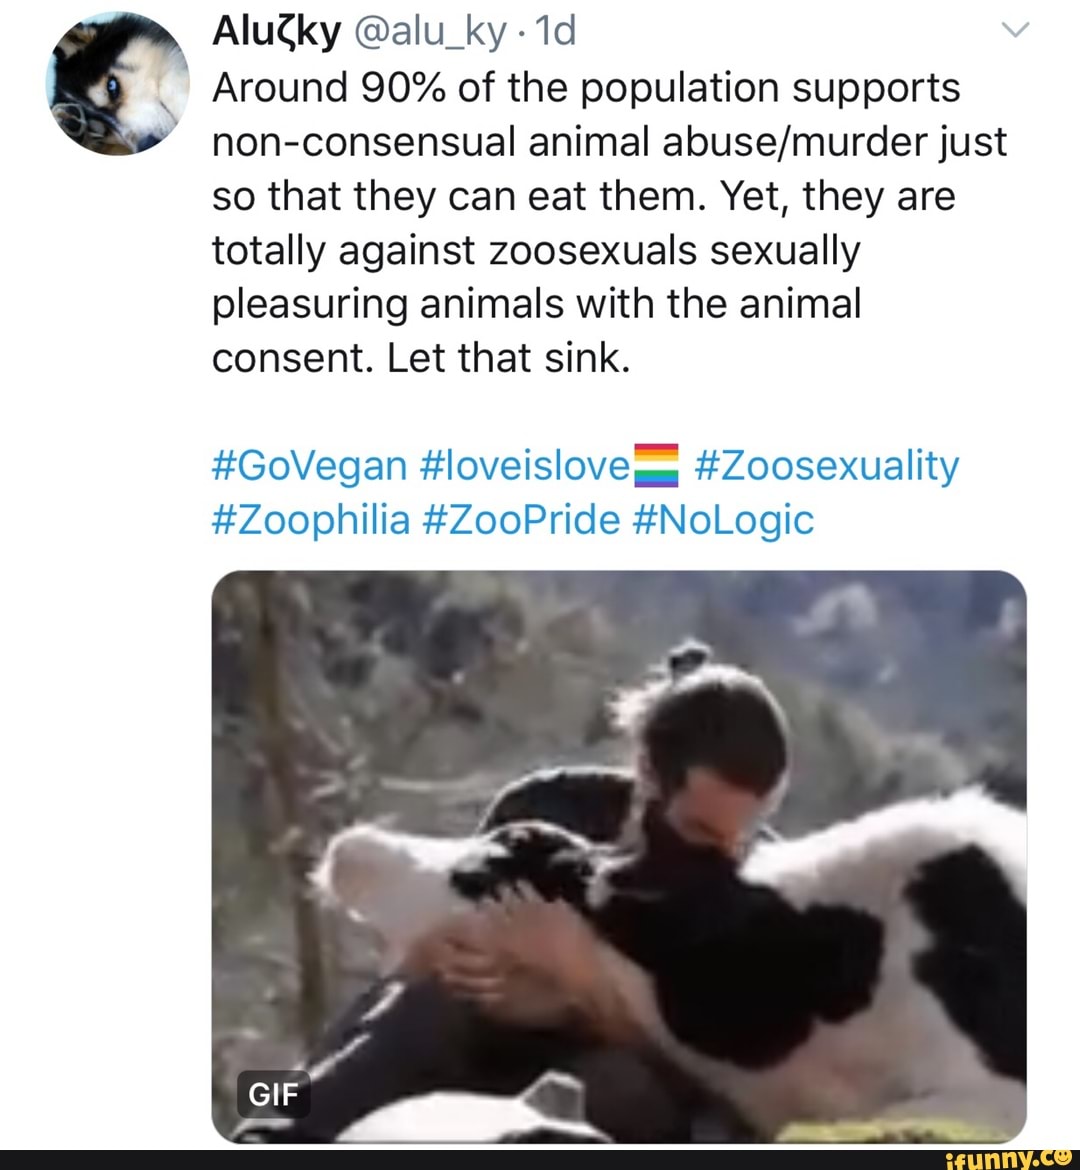 AIuCky @alu_ky-1d Around 90% of the population supports non-consensual  animal abuse/murderjust so